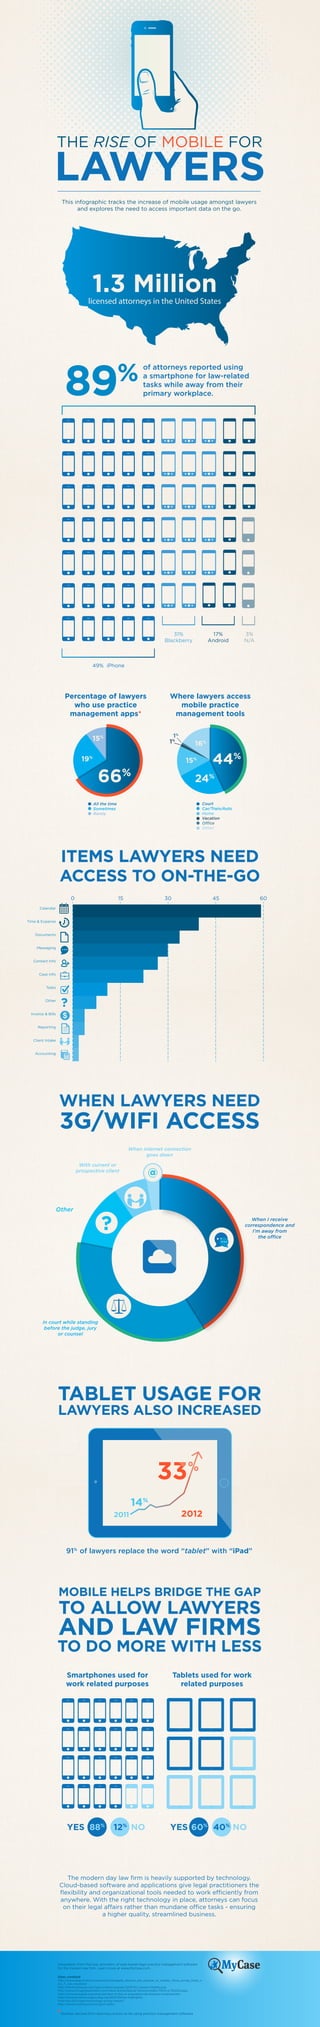 THE RISE OF MOBILE FOR

LAWYERS
This infographic tracks the increase of mobile usage amongst lawyers
and explores the need to access important data on the go.

1.3 Million

licensed attorneys in the United States

of attorneys reported using
a smartphone for law-related
tasks while away from their
primary workplace.

31%
Blackberry

17%
Android

3%
N/A

49% iPhone

Percentage of lawyers
who use practice
management apps*

Where lawyers access
mobile practice
management tools

15%

1

1%

%

19%

16%

44%

15%

66%

24%
Court
Car/Train/Auto
Home
Vacation
Office
Other

All the time
Sometimes
Rarely

ITEMS LAWYERS NEED
ACCESS TO ON-THE-GO
0

15

30

45

60

Calendar
Time & Expense
Documents
Messaging
Contact Info
Case Info
Tasks
Other
Invoice & Bills
Reporting
Client Intake
Accounting

WHEN LAWYERS NEED

3G/WIFI ACCESS
When internet connection
goes down
With current or
prospective client

Other

@

?

When I receive
correspondence and
I’m away from
the office

In court while standing
before the judge, jury
or counsel

TABLET USAGE FOR
LAWYERS ALSO INCREASED

33
14%
2011

2012

91% of lawyers replace the word “tablet” with “iPad”

MOBILE HELPS BRIDGE THE GAP

TO ALLOW LAWYERS

AND LAW FIRMS

TO DO MORE WITH LESS
Smartphones used for
work related purposes

Tablets used for work
related purposes

YES 88%

YES 60% 40% NO

12% NO

The modern day law ﬁrm is heavily supported by technology.
Cloud-based software and applications give legal practitioners the
ﬂexibility and organizational tools needed to work efficiently from
anywhere. With the right technology in place, attorneys can focus
on their legal affairs rather than mundane office tasks - ensuring
a higher quality, streamlined business.

Infographic from MyCase, providers of web-based legal practice management software
for the modern law ﬁrm. Learn more at www.MyCase.com.
Sites credited

http://www.abajournal.com/news/article/apple_devices_are_popular_in_smaller_ﬁrms_survey_ﬁnds_o
nly_7_use_blackber/
http://thedroidlawyer.com/wp-content/uploads/2013/01/Lawyers-Mobile.png
http://www.chicagolawbulletin.com/News-Extra/Special-Sections/ABA/TECH-jc7312012.aspx
http://www.wisegeek.org/what-percent-of-the-us-population-do-lawyers-comprise.htm
http://www.lawtechnologytoday.org/2012/09/ten-highlightsfrom-the-2012-legal-technology-survey-report/
http://www.travelinsurance.org/oil-spills/

*Number derived from attorneys known to be using practice management software

 